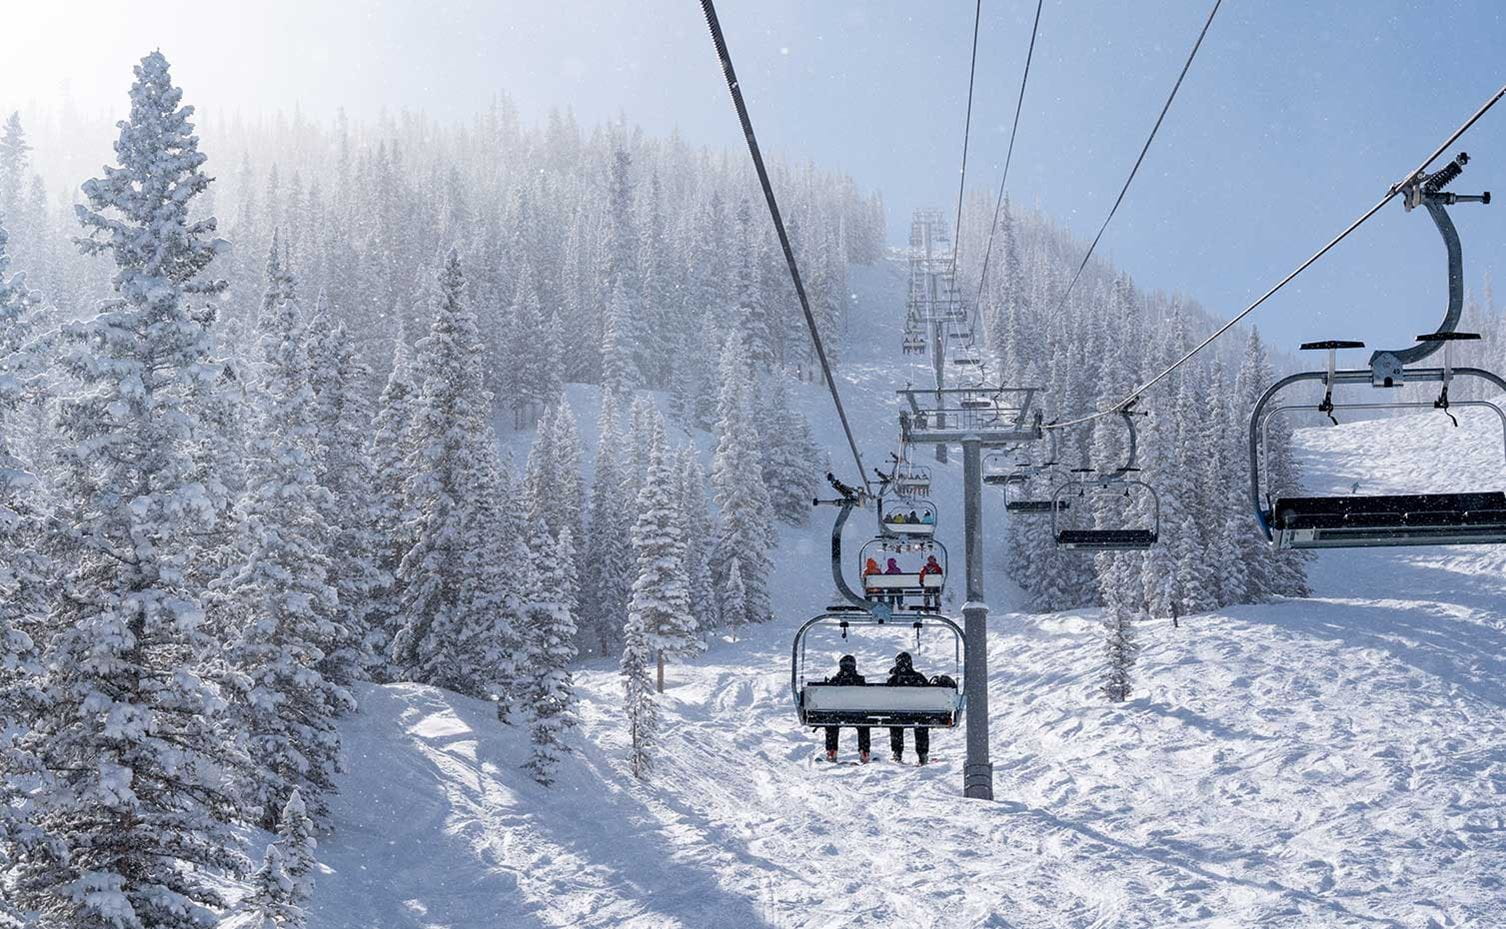 Skiers ride a lift up at Aspen Snowmass as the sun breaks through clouds